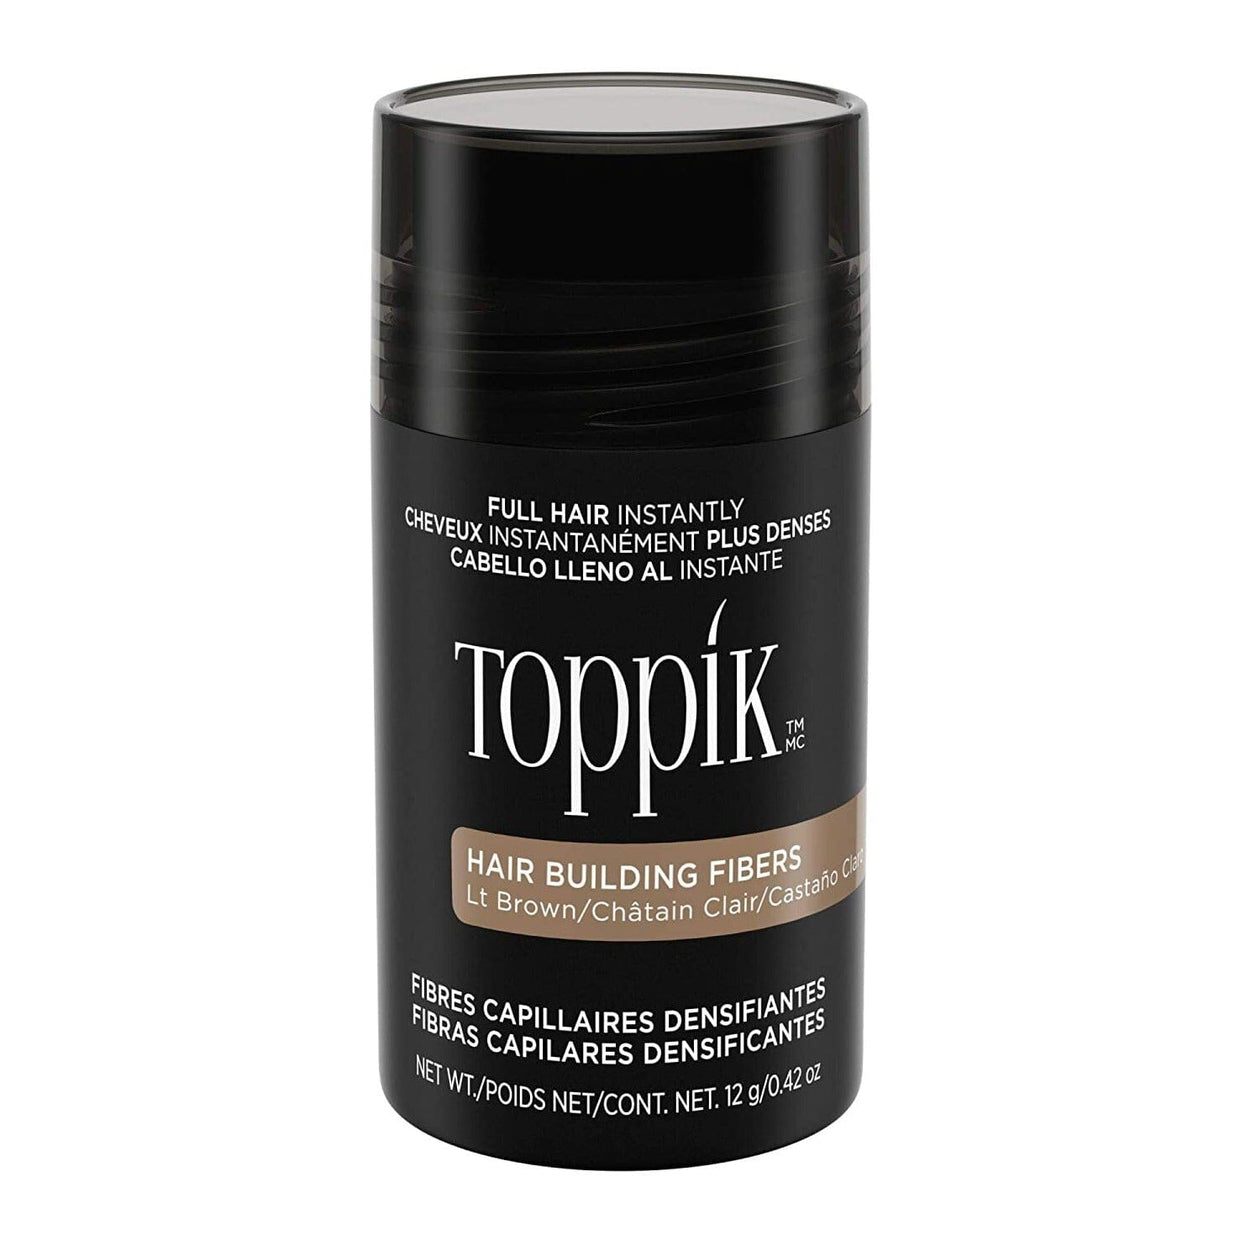 Toppik Hair Building Fibers - LIGHT BROWN Hair Styling Products Toppik 0.42 oz Shop at Exclusive Beauty Club